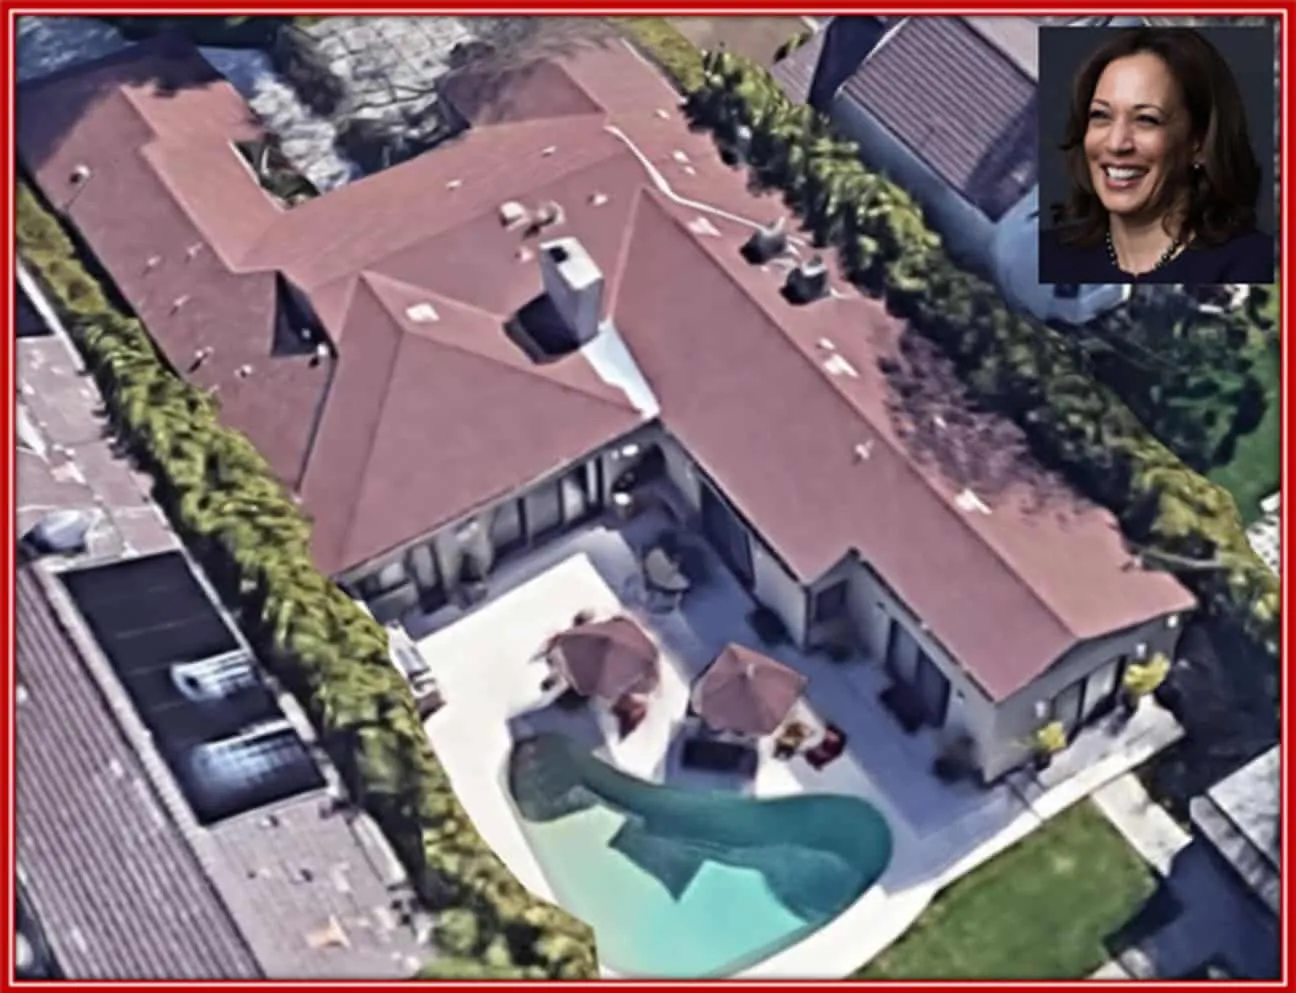 Here is her family’s $4.8 million home in Los Angeles.